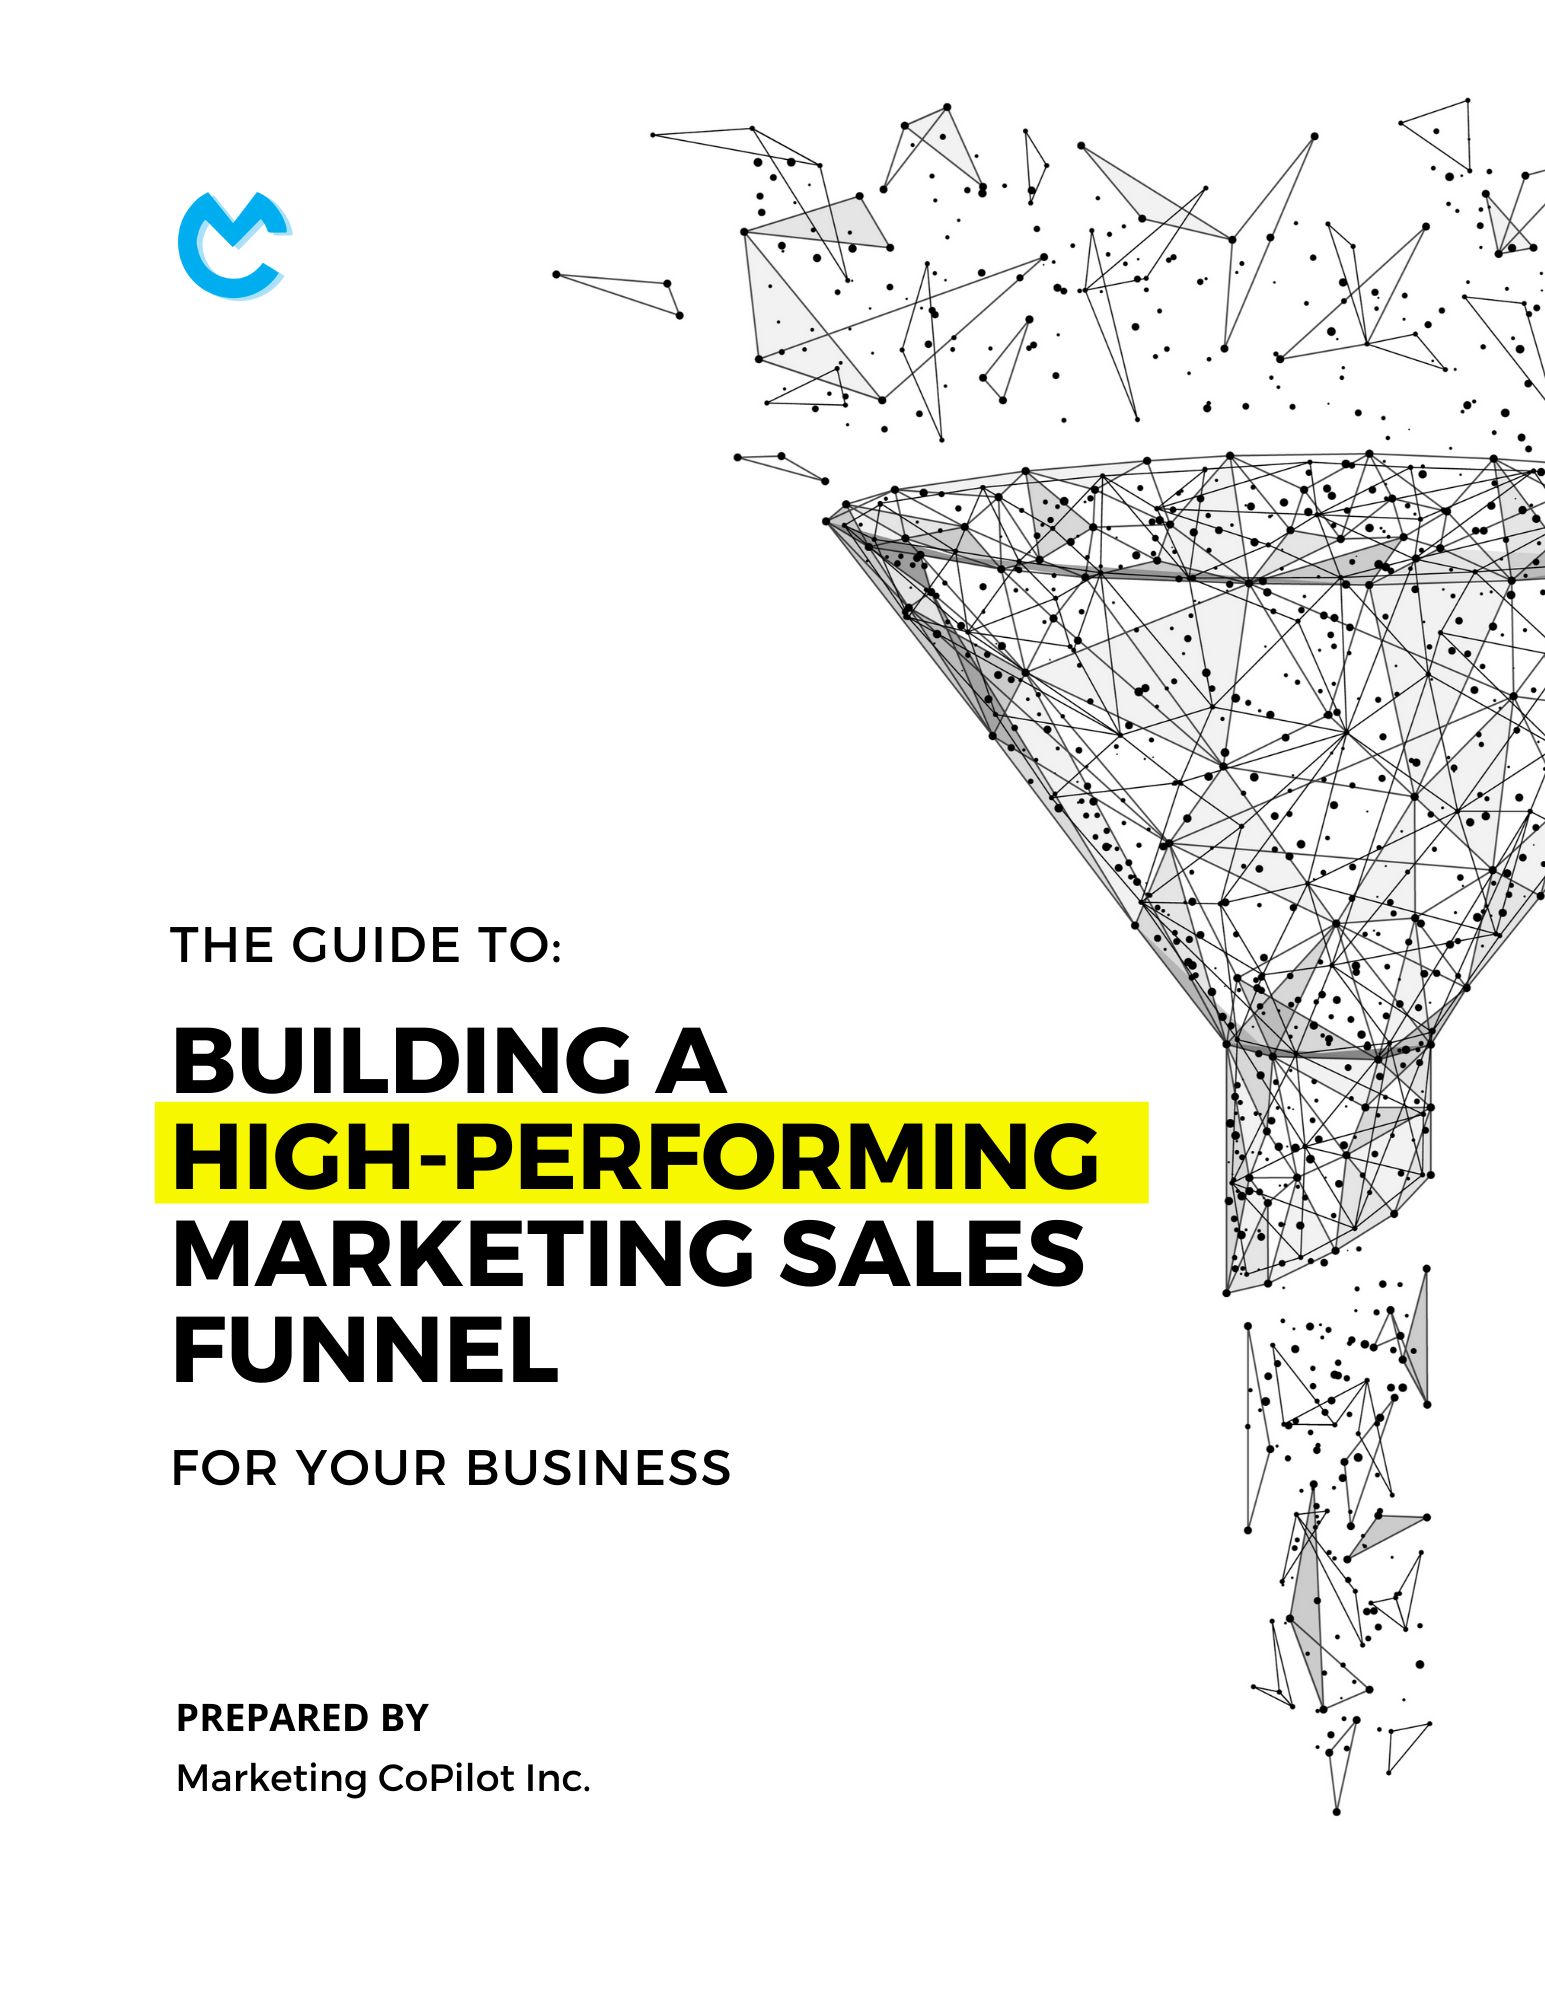 Building a High-Performing Marketing Sales Funnel